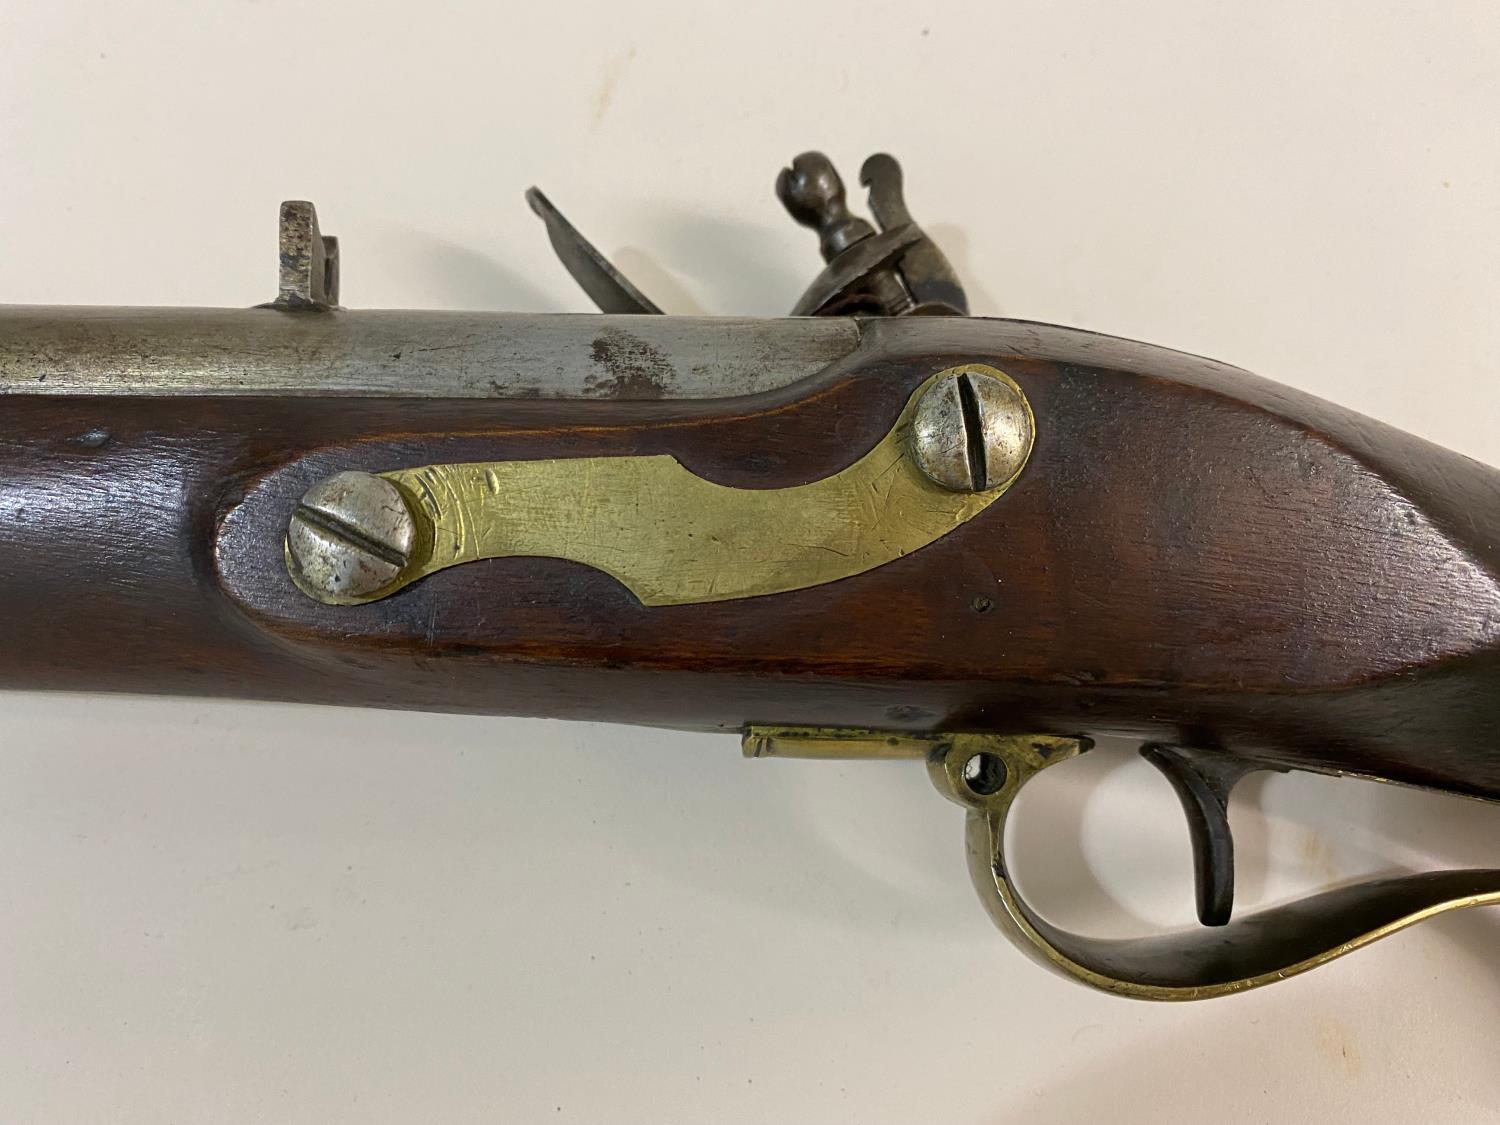 AN EARLY 19TH CENTURY 'BAKER' TYPE RIFLE WITH ISSUE MARKS. - Image 10 of 12